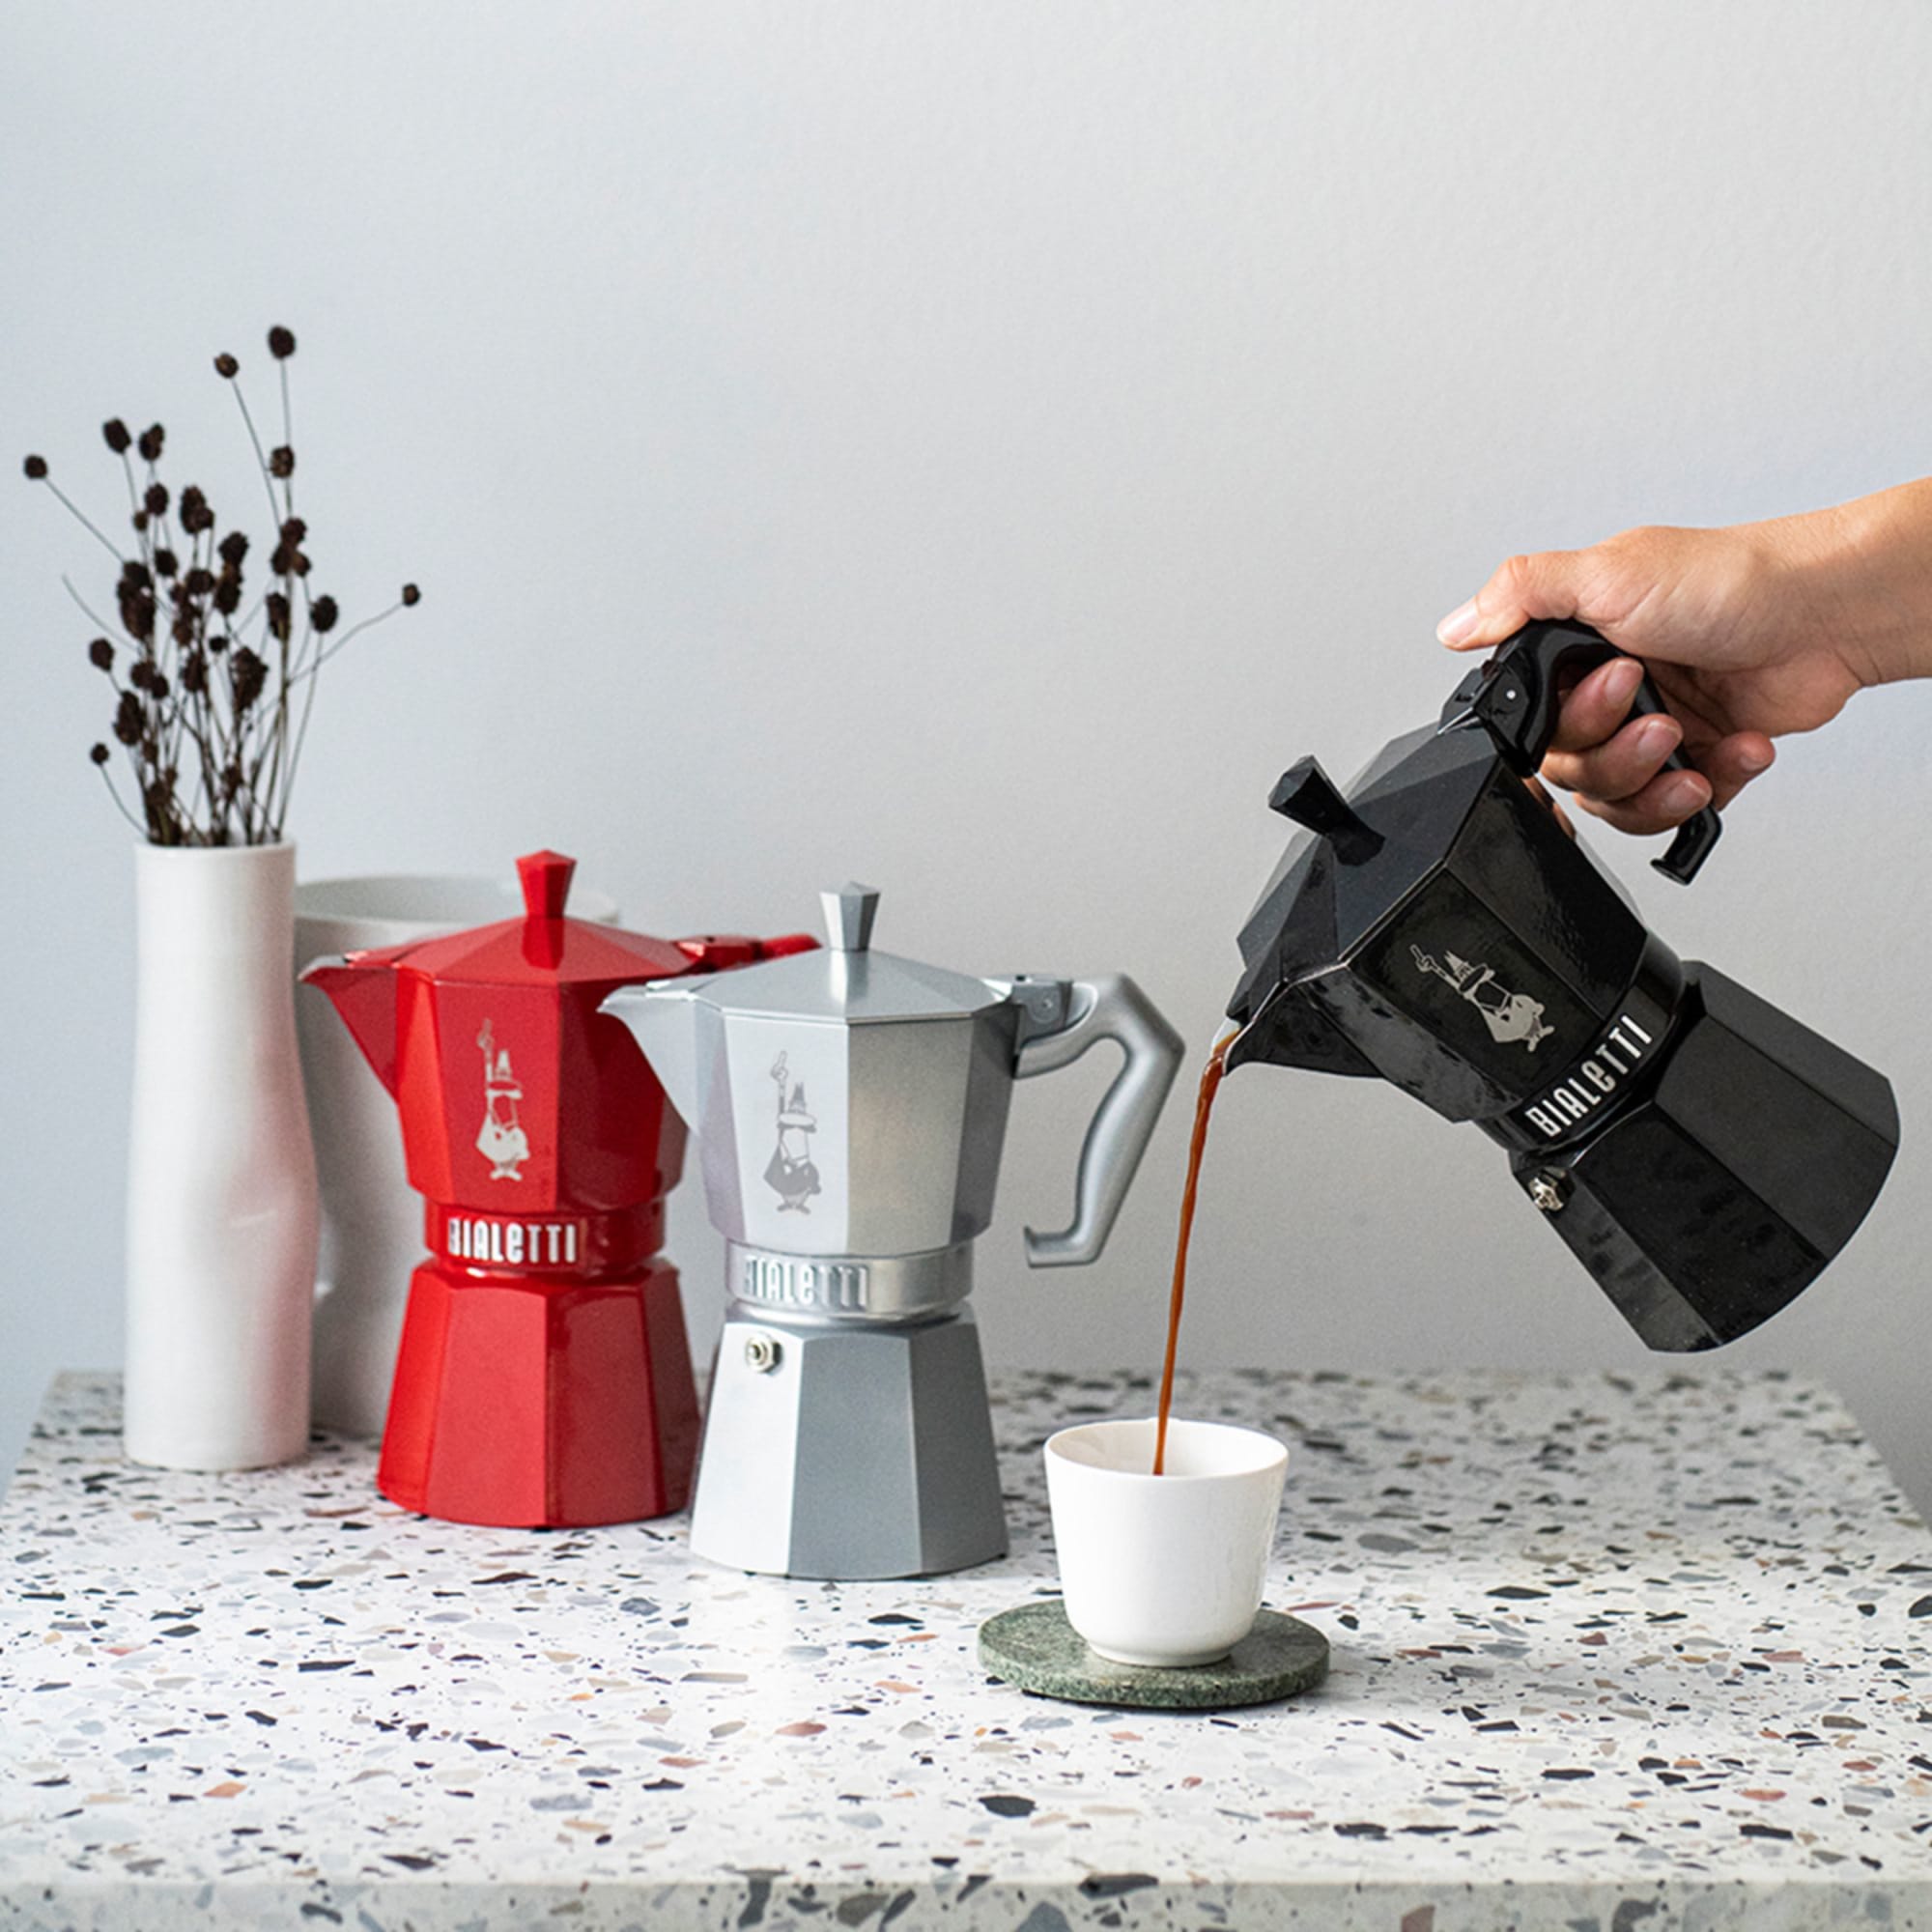 https://res.cloudinary.com/kitchenwarehouse/image/upload/c_fill,g_face,w_1250/f_auto/t_PDP_2000x2000/Supplier%20Images%20/2000px/Bialetti-Moka-Exclusive-Stovetop-Expresso-Maker-6-Cup-Red_4_2000px.jpg?imagetype=pdp_full